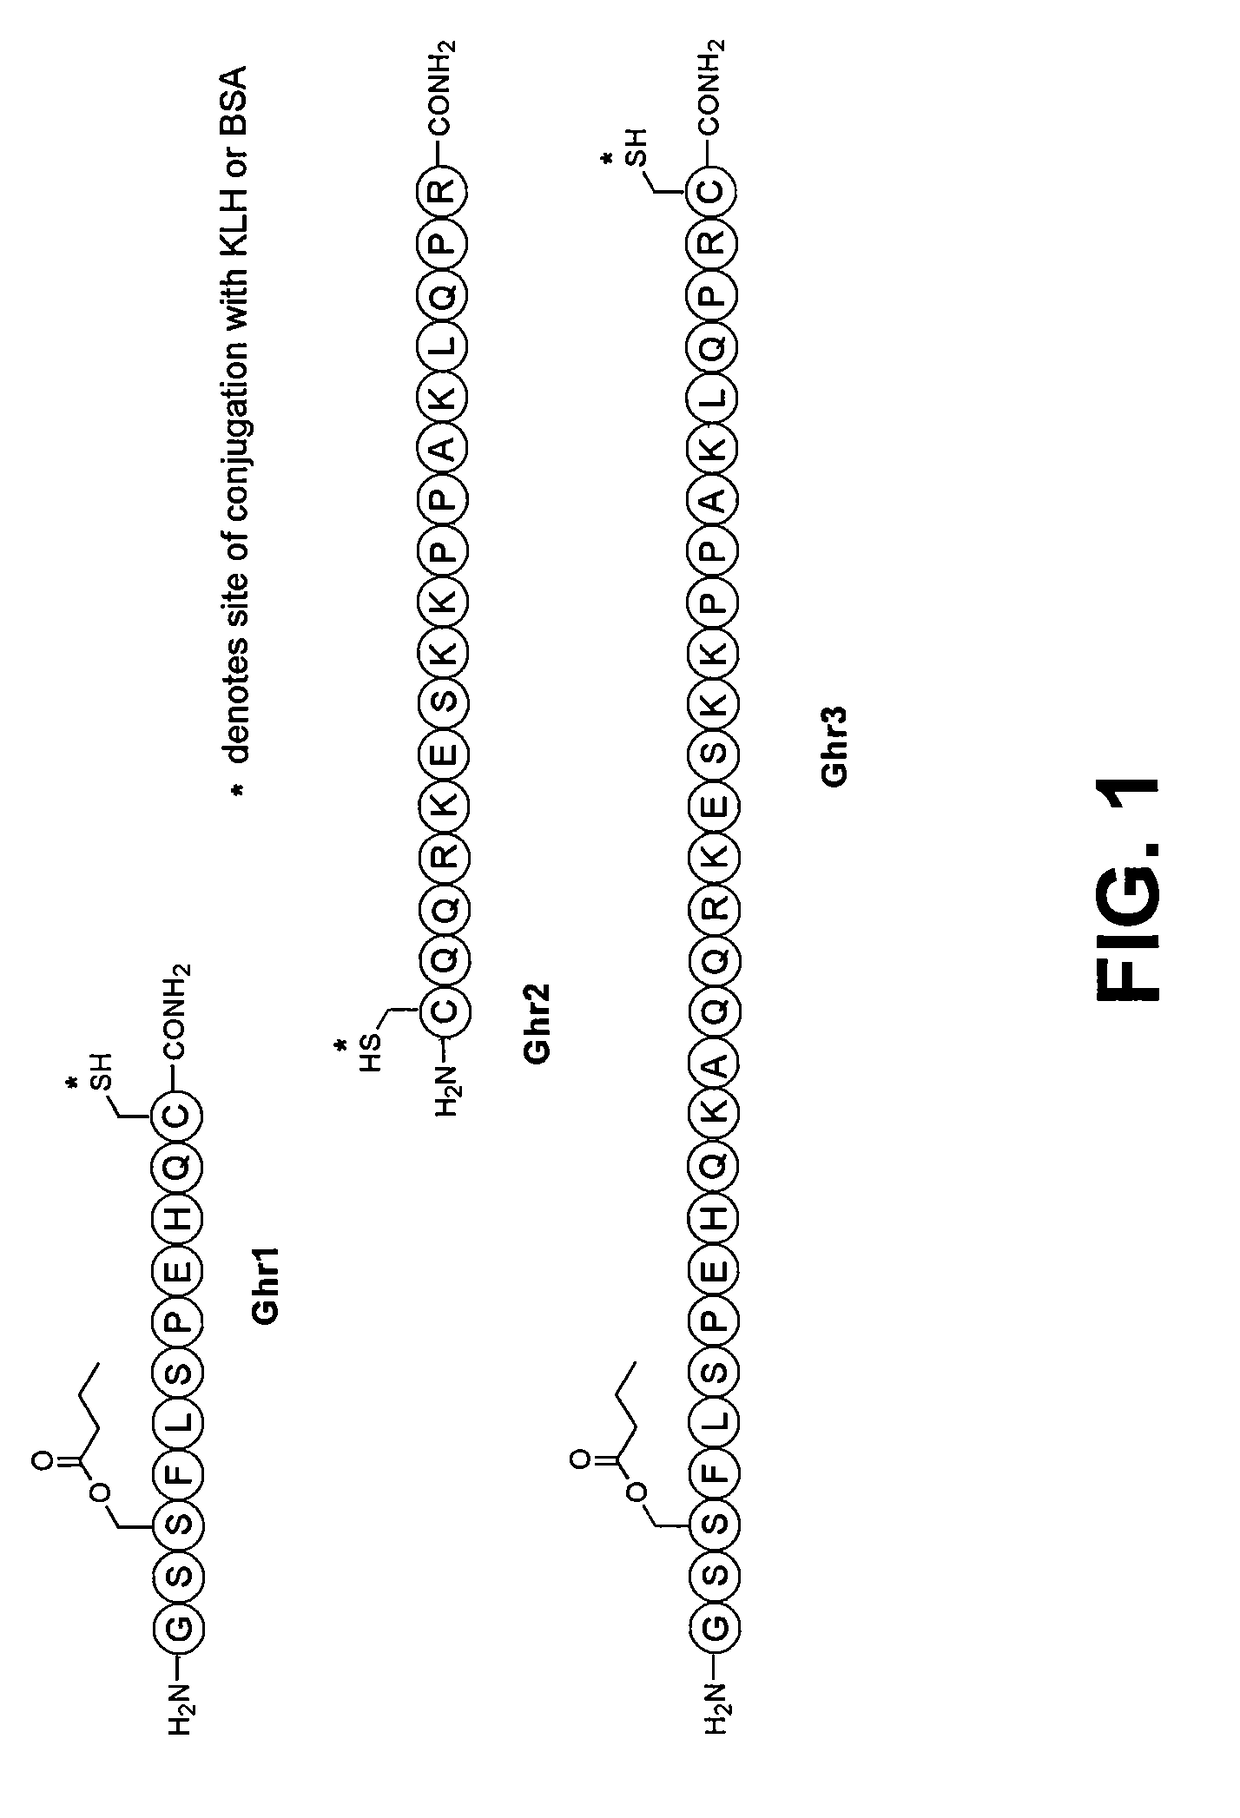 Vaccines and methods for controlling adiposity